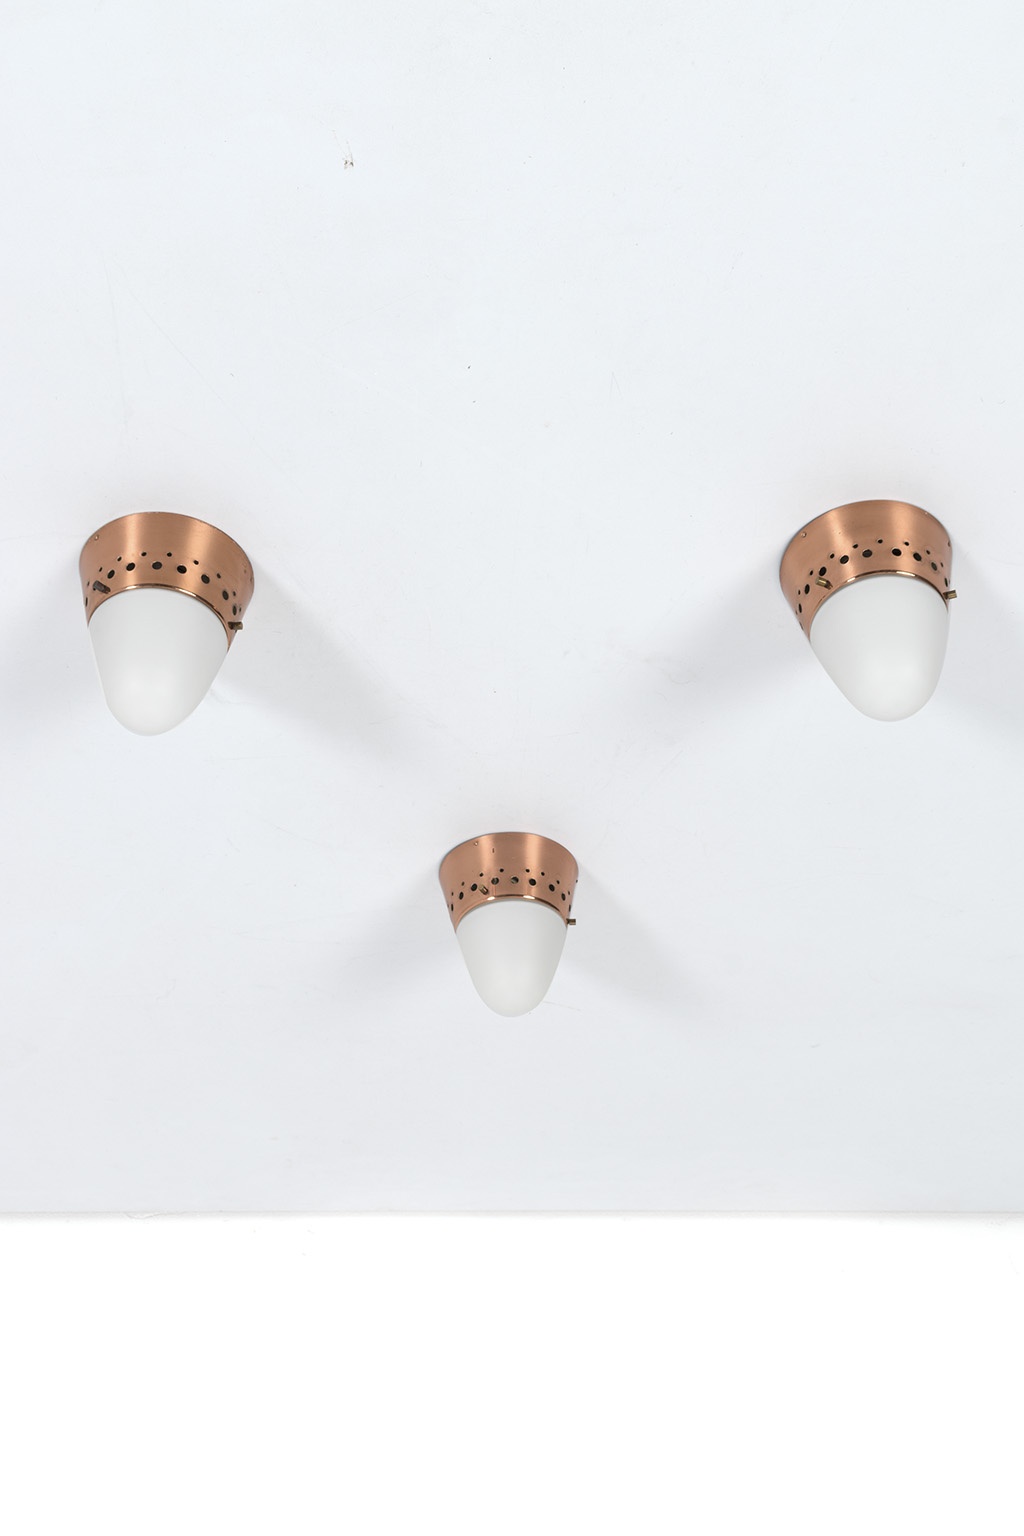 Set of 3 brass ceiling lamps